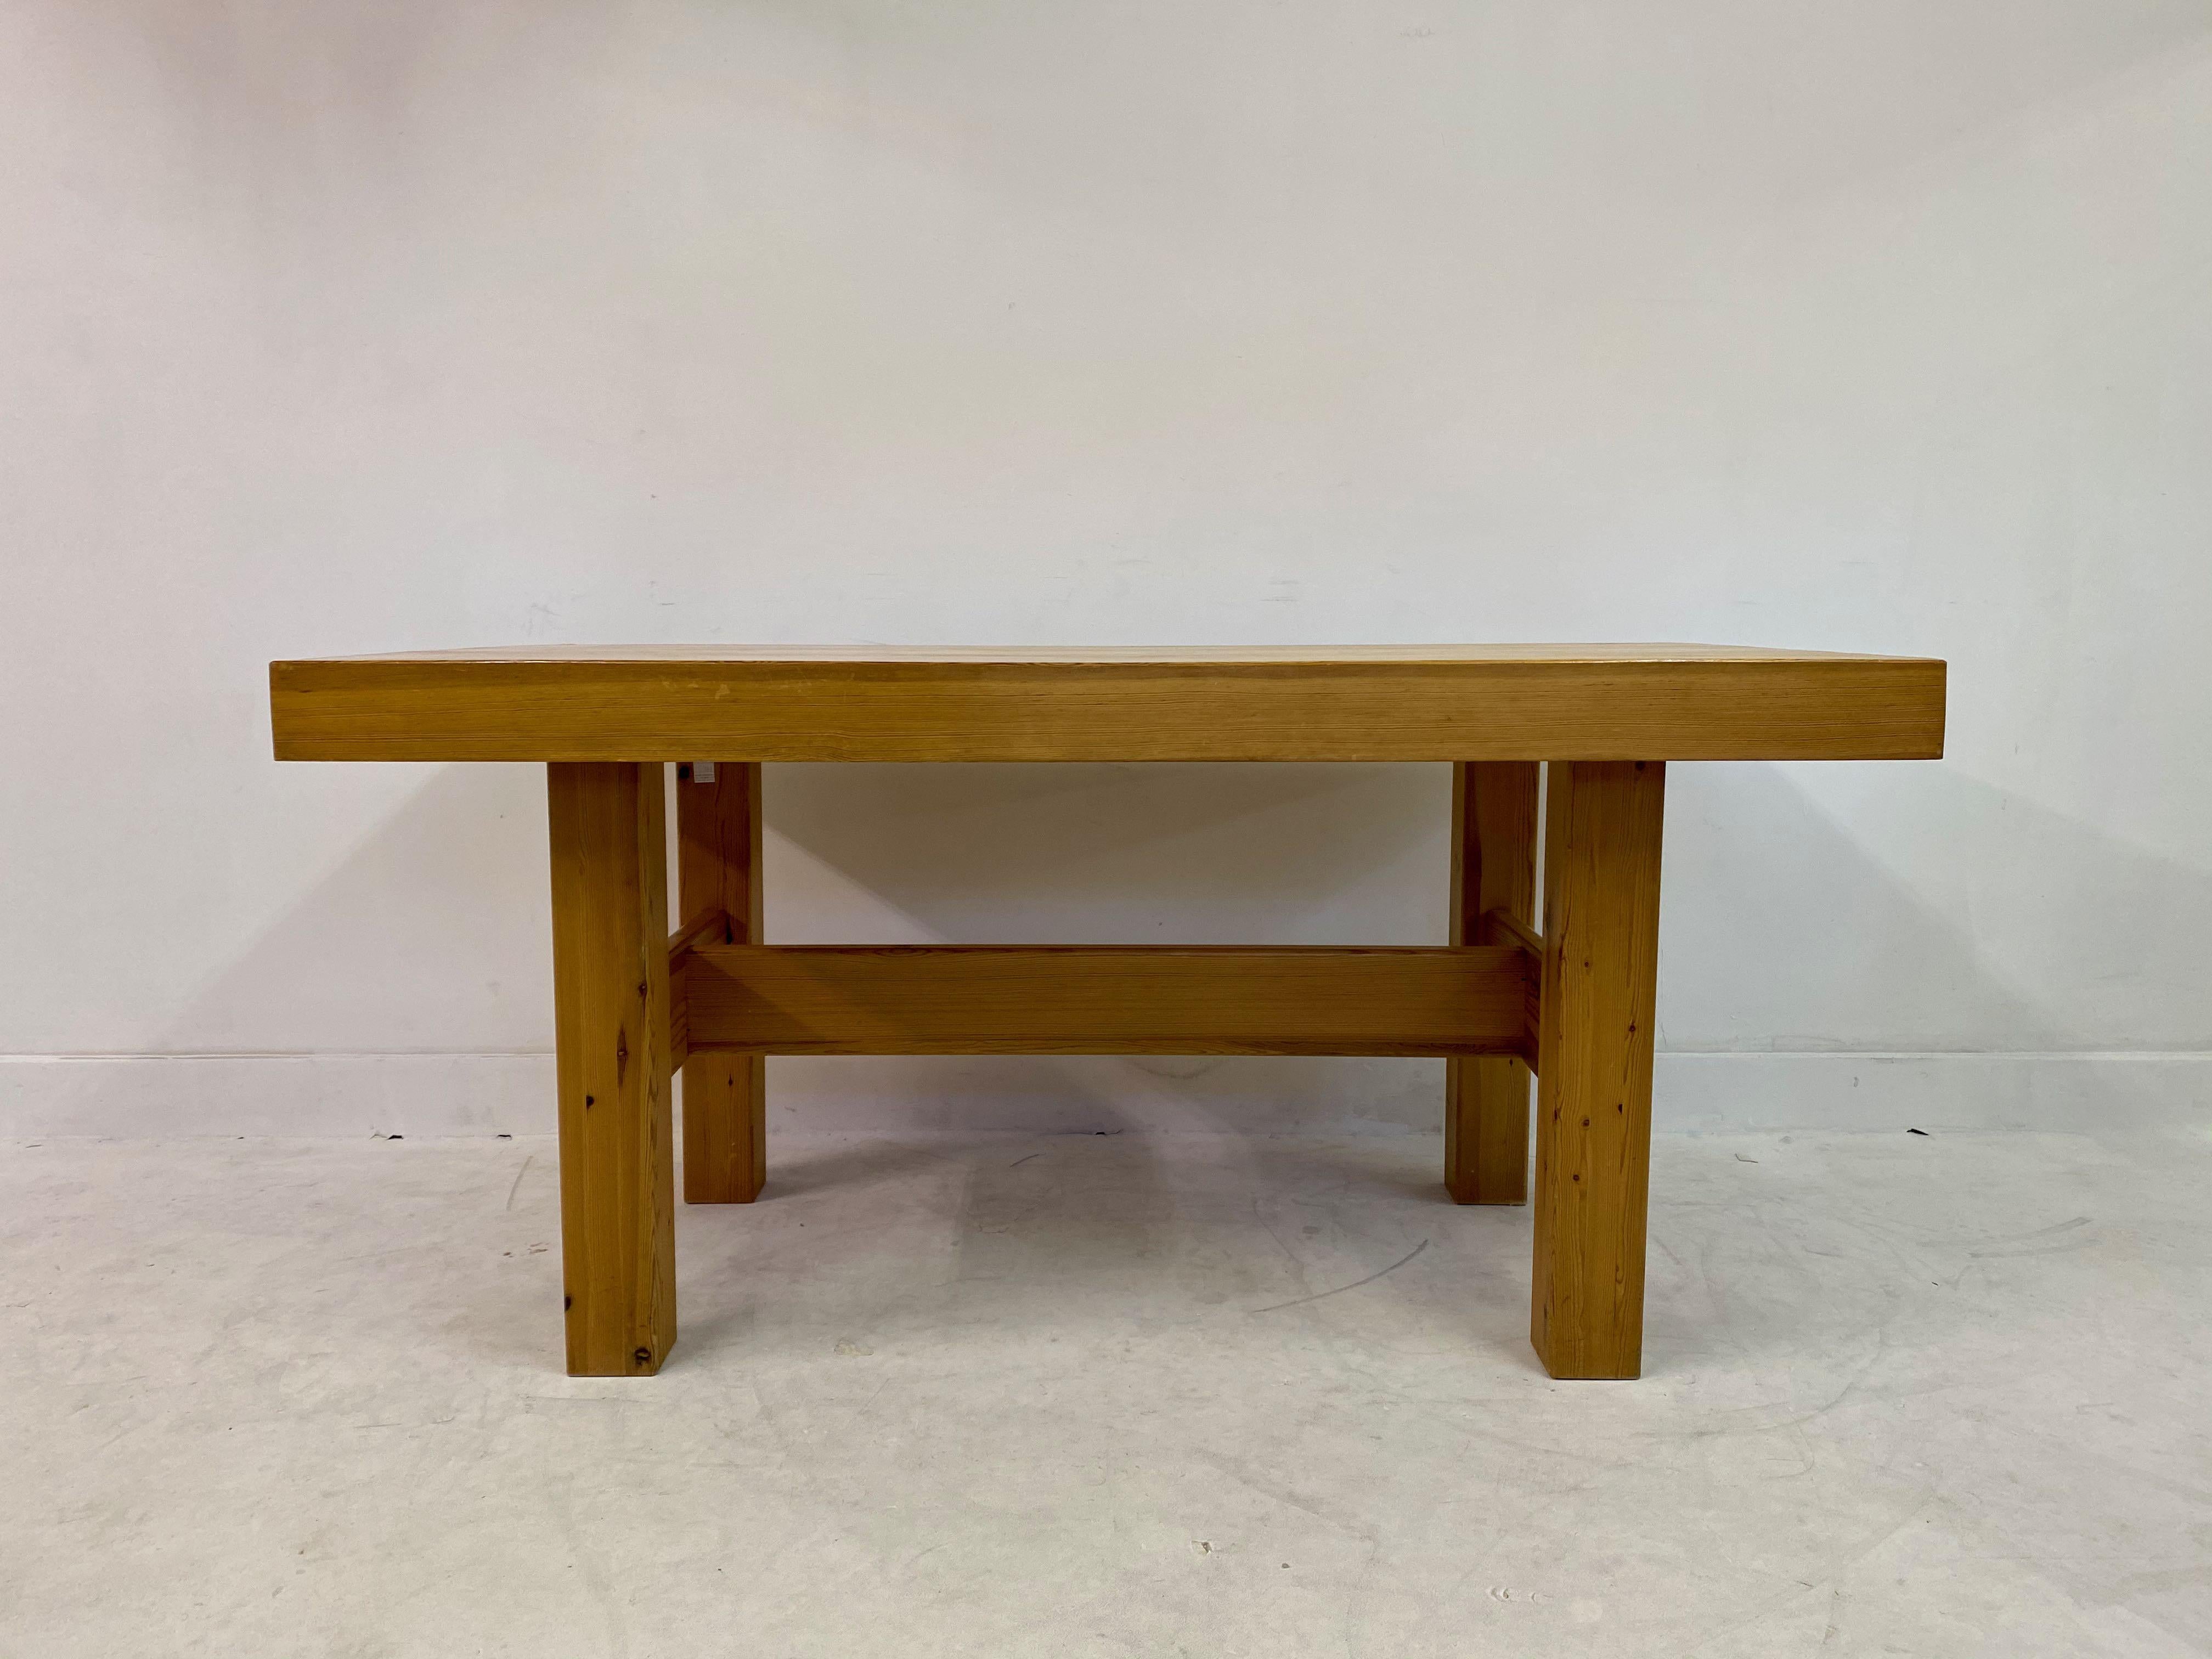 Solid pine dining suite

Table and five chairs

Sweden 1970s-1980s.

Chair dimensions are 95h x 37w x 43d cm

Seat height 43cm